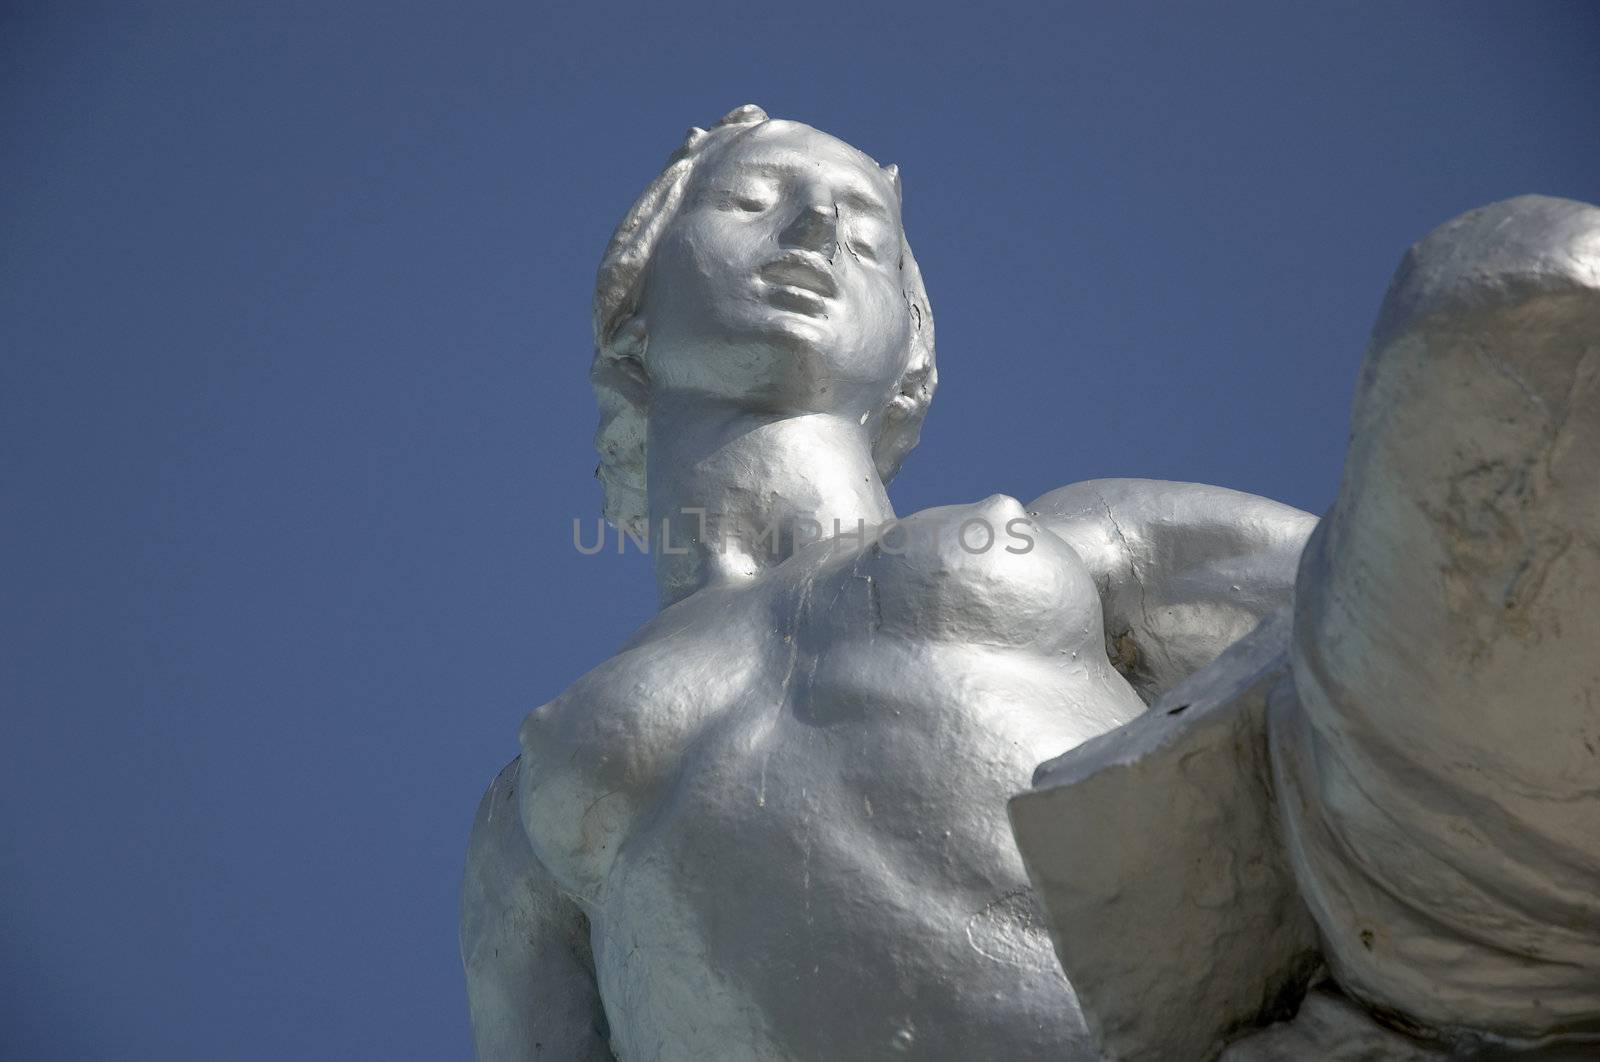 A face silver staue of a nude woman with a clear blue skyl